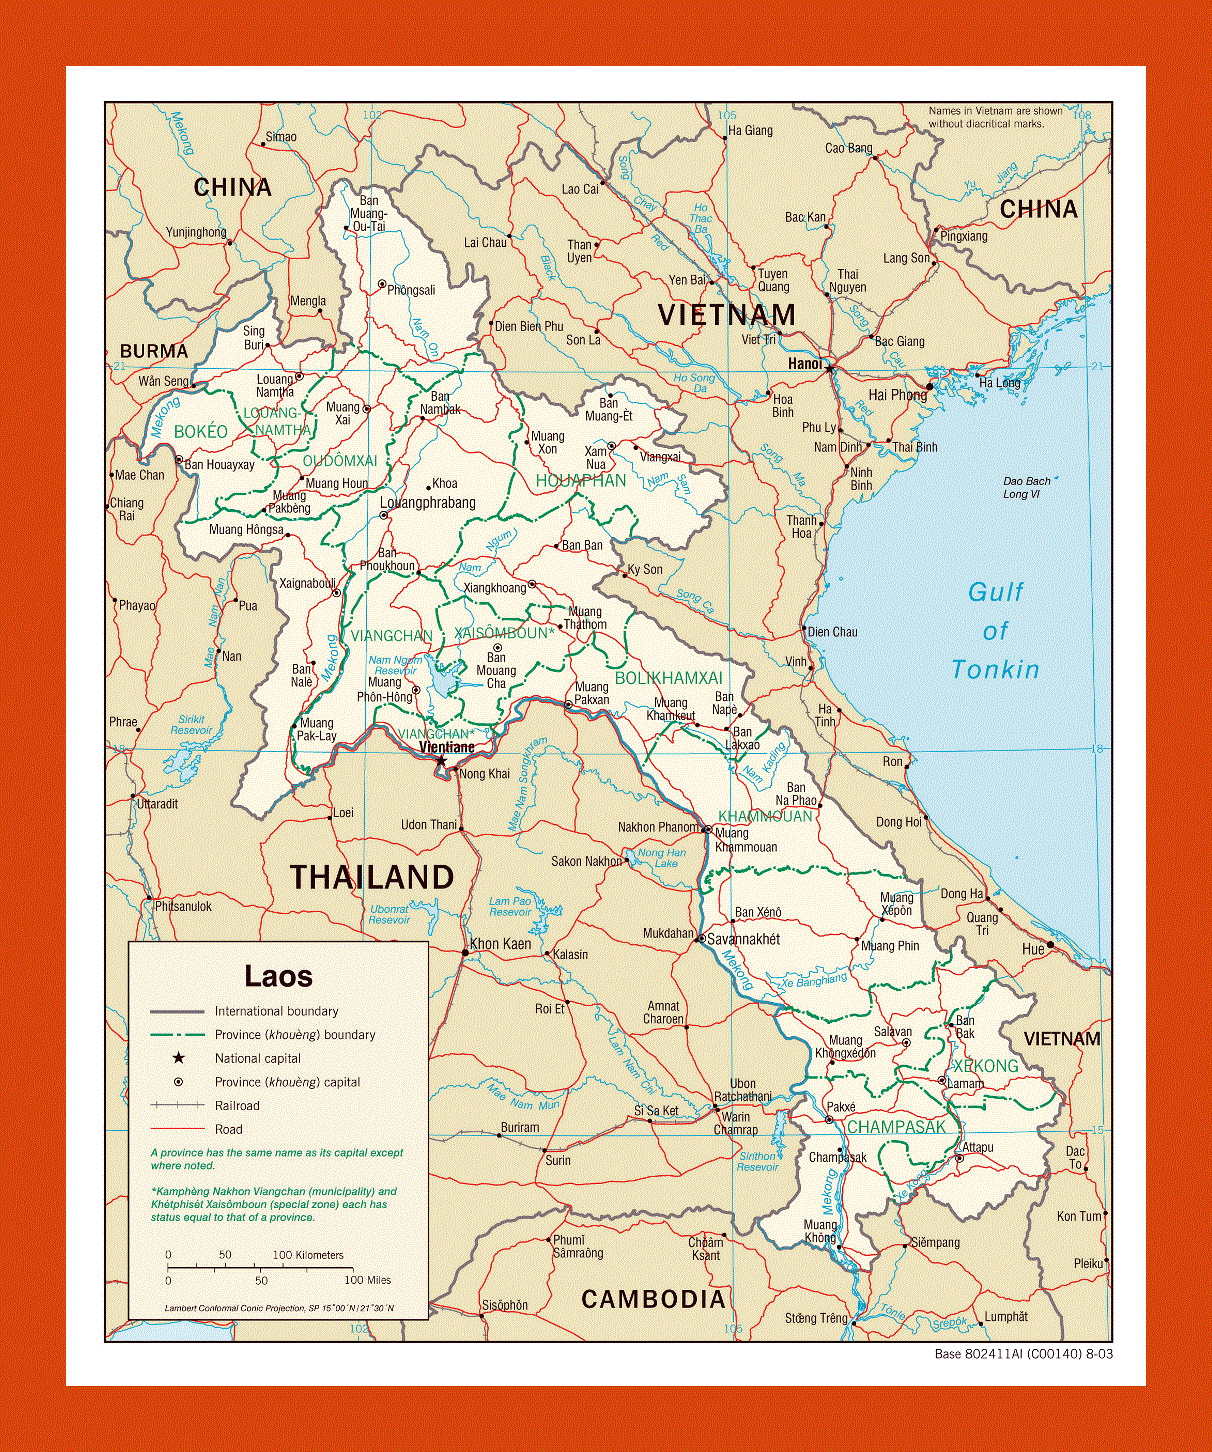 Political and administrative map of Laos - 2003